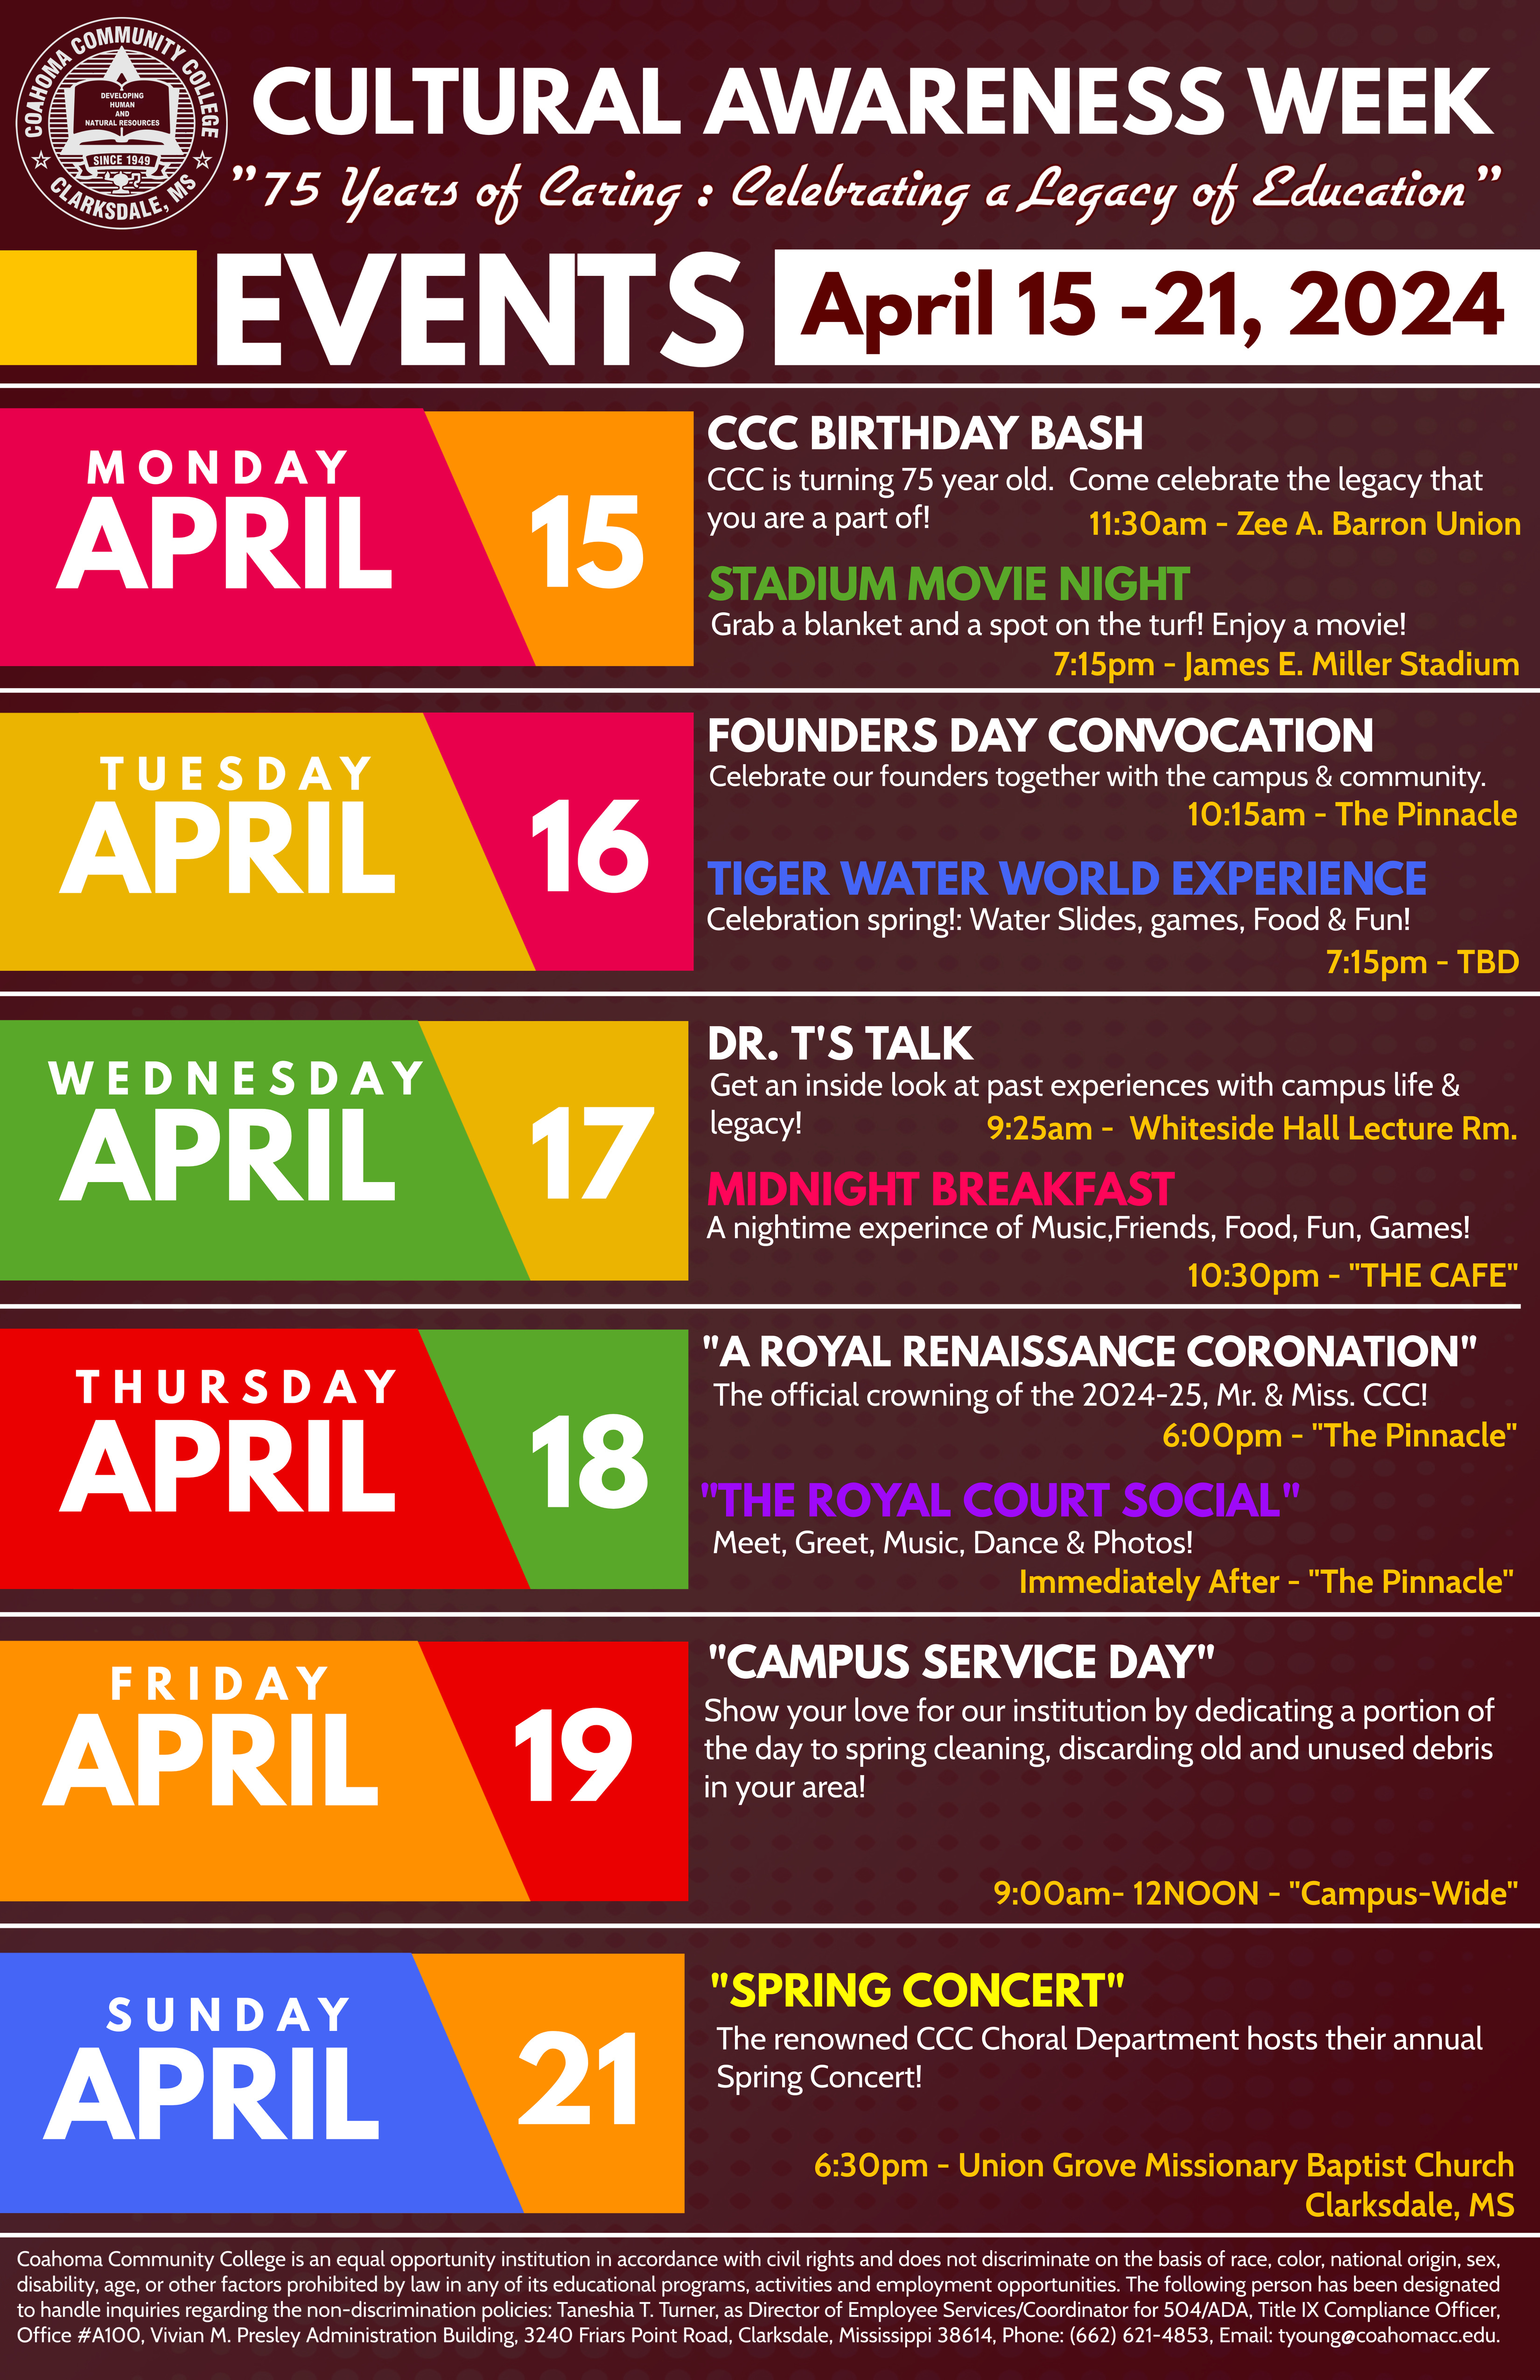 Cultural Awareness Week Official Graphic